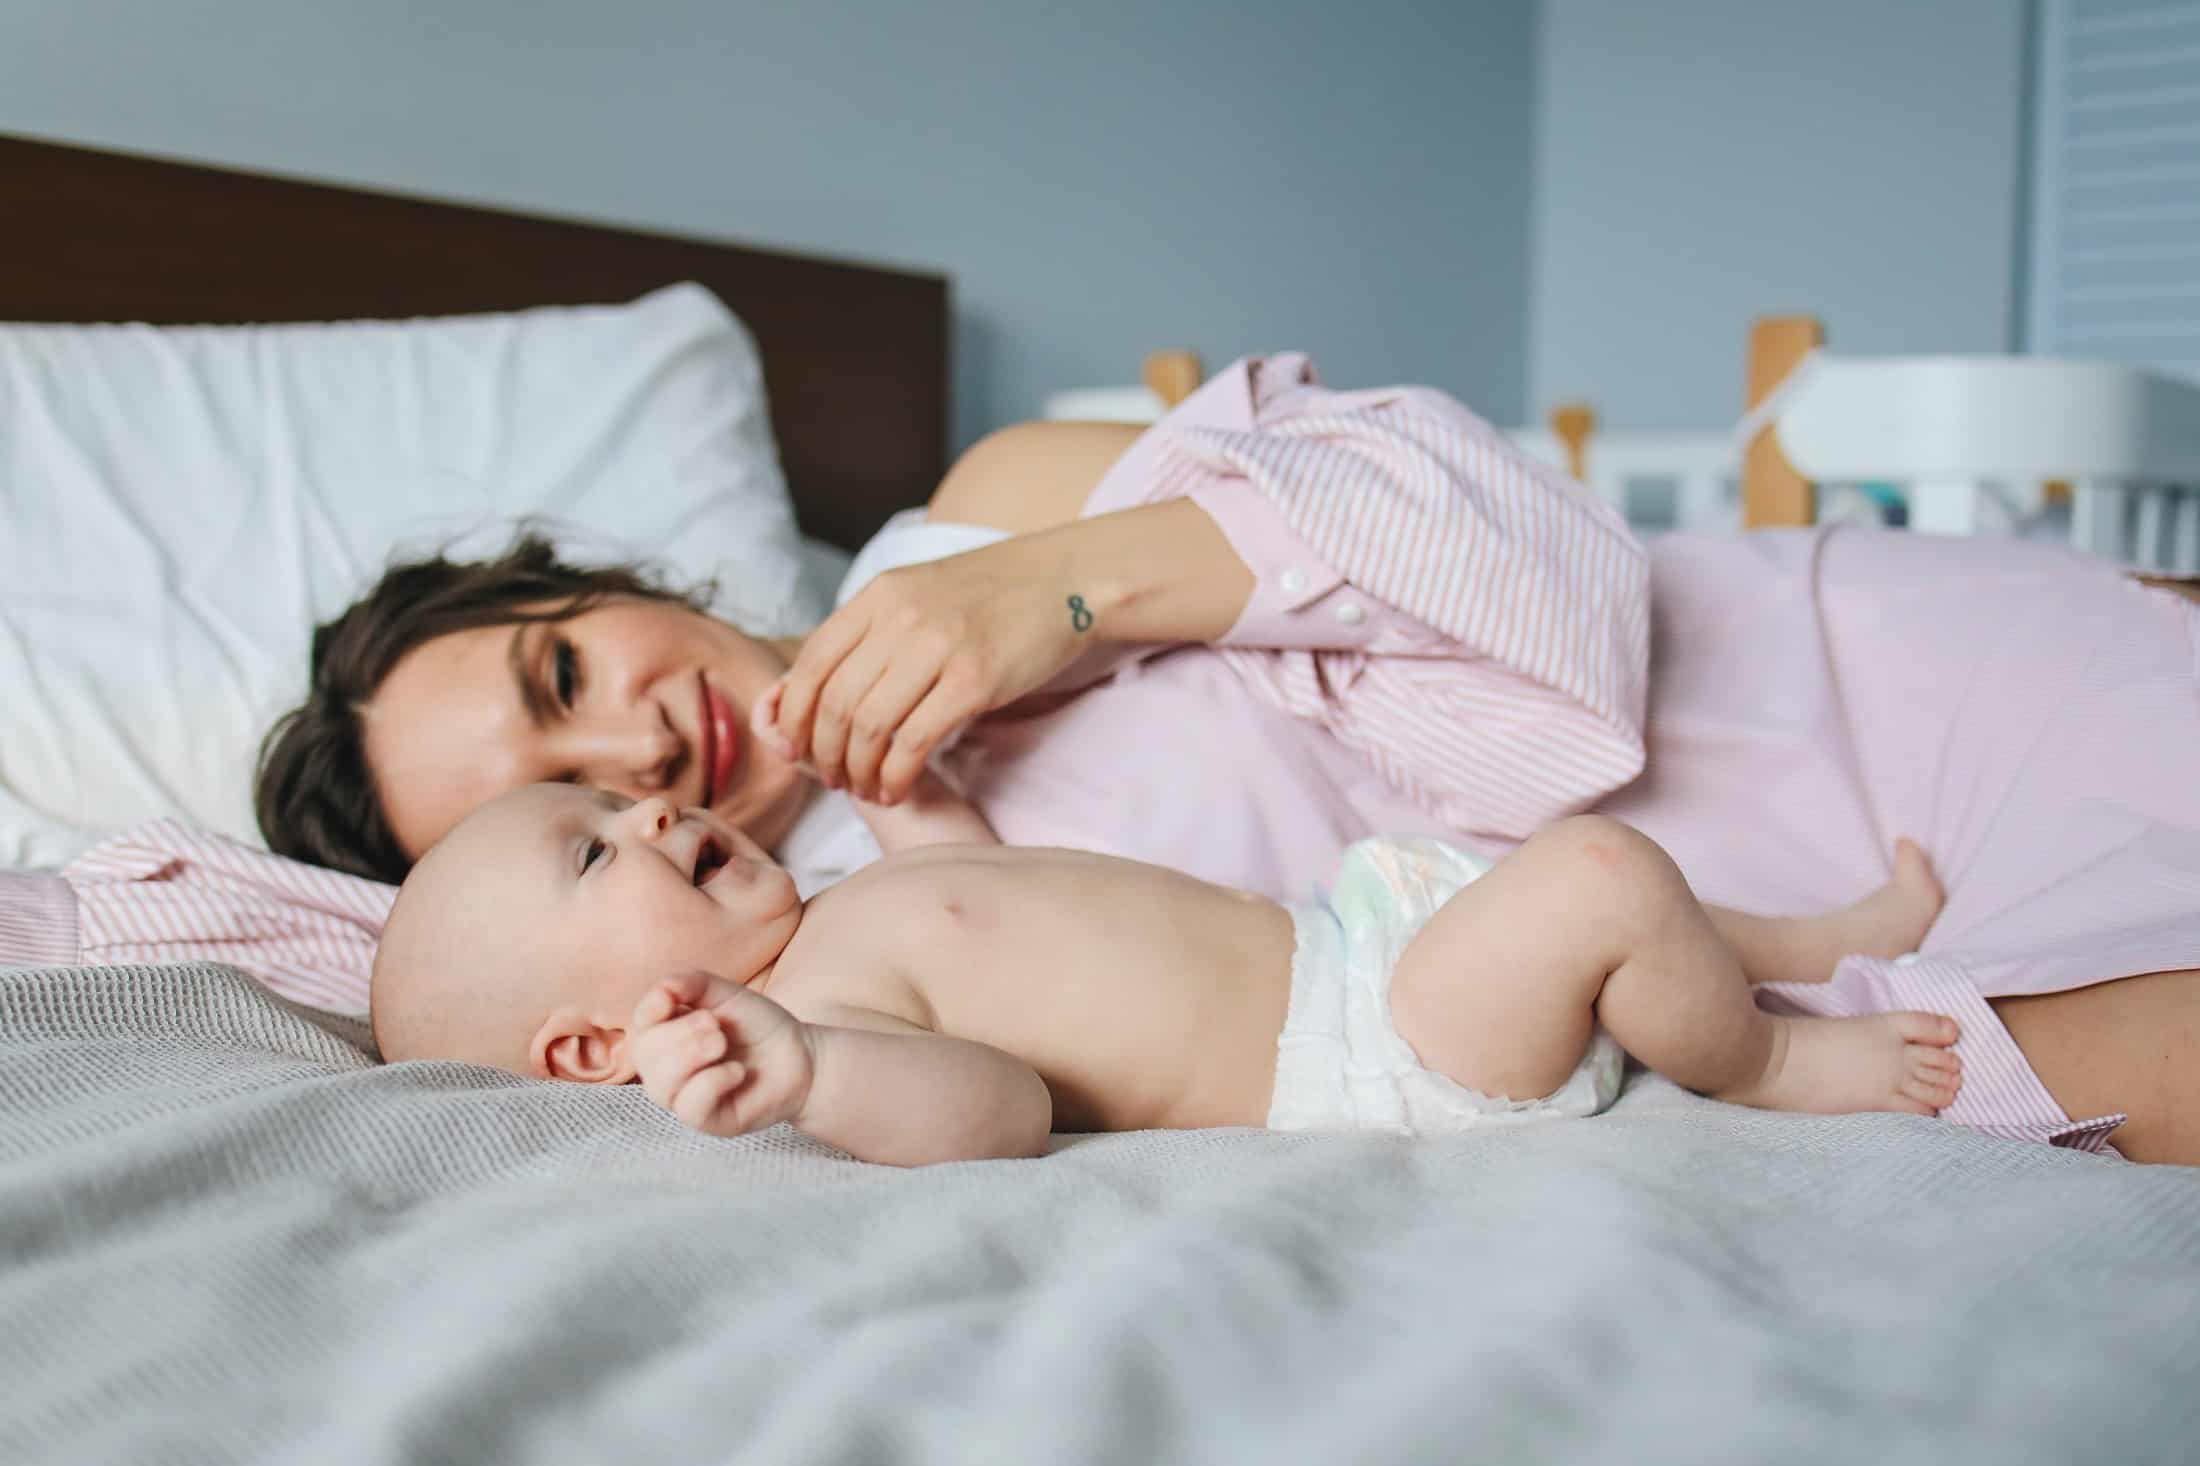 How should a young mom take care of herself during postpartum?